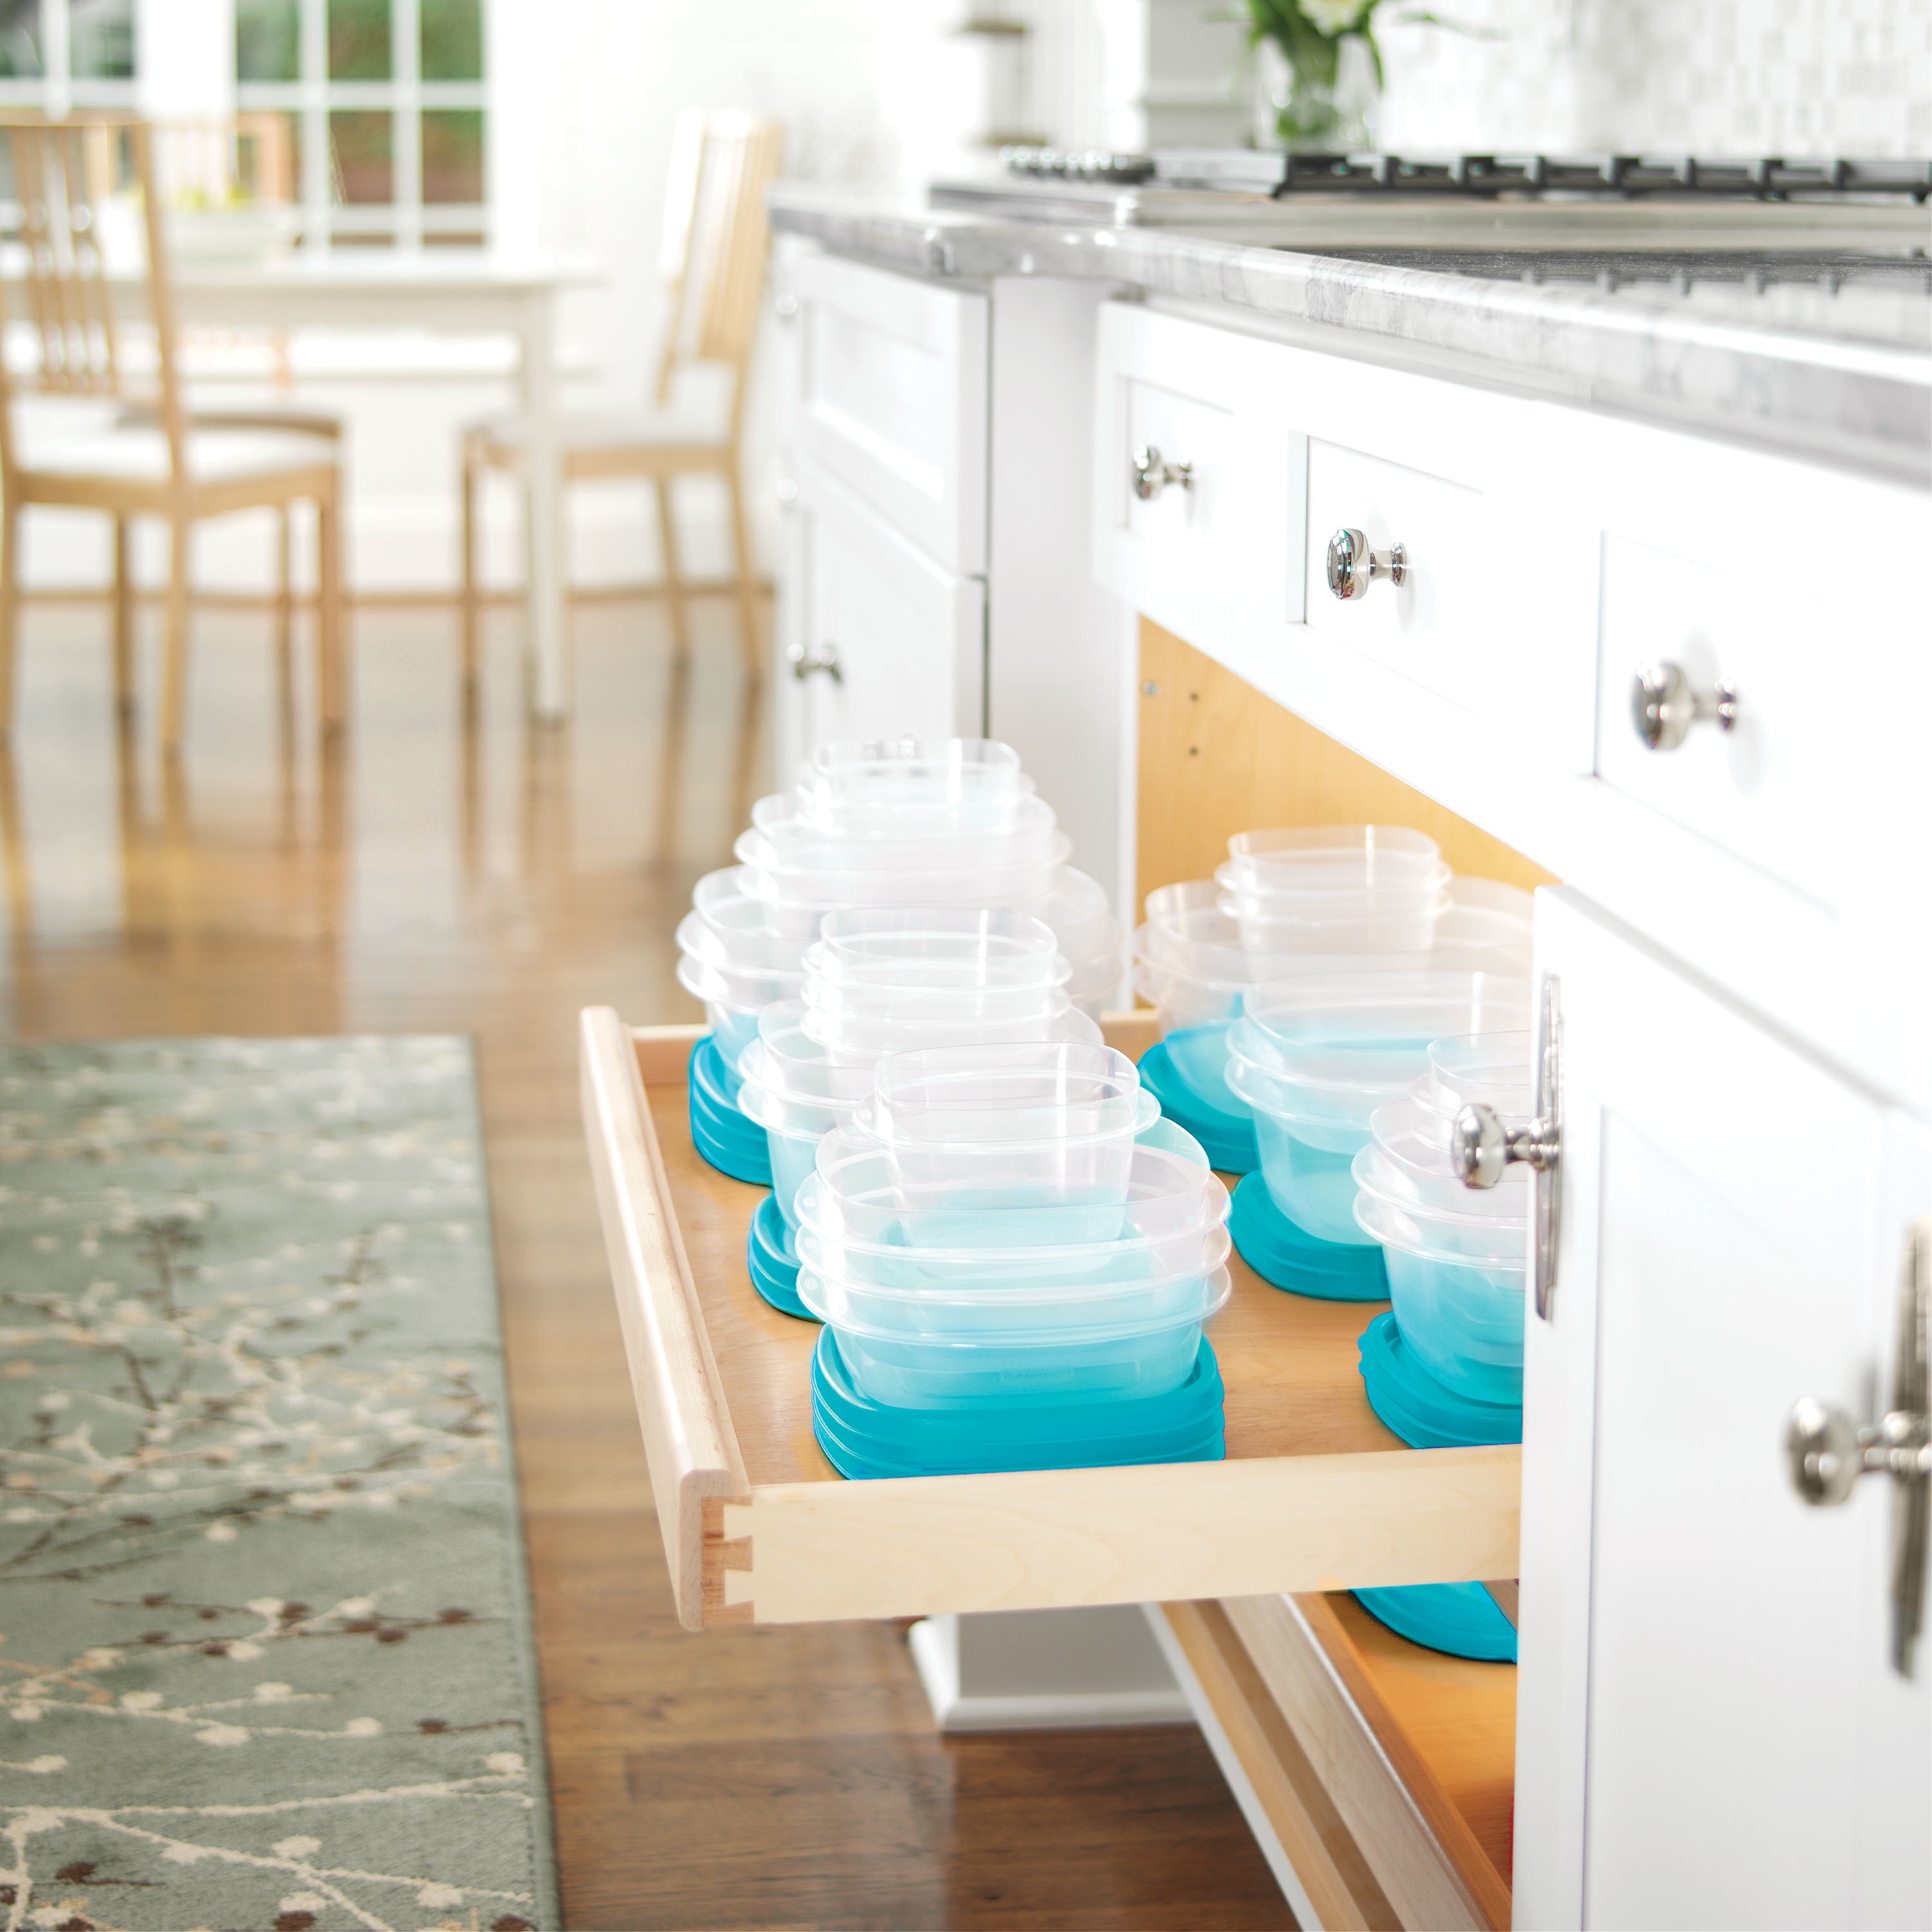 Rubbermaid Food Storage 38 Piece Set with Vent Easy Find Lids, Teal SPECIAL  ED.